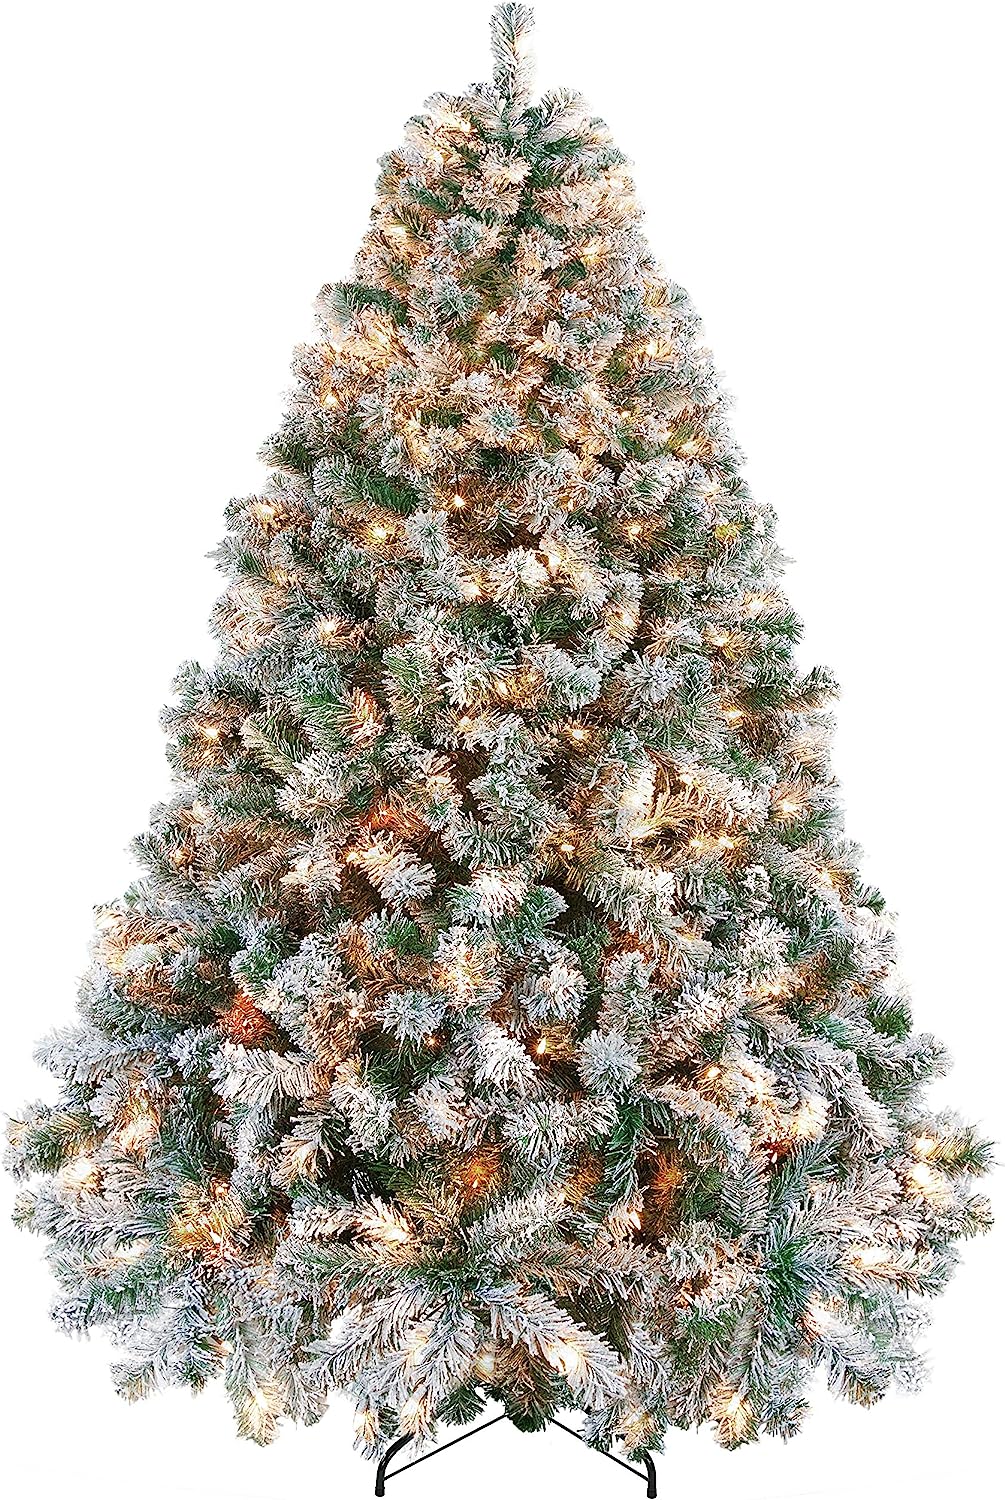 Yaheetech 6ft Pre-lit Artificial Christmas Tree with [...]